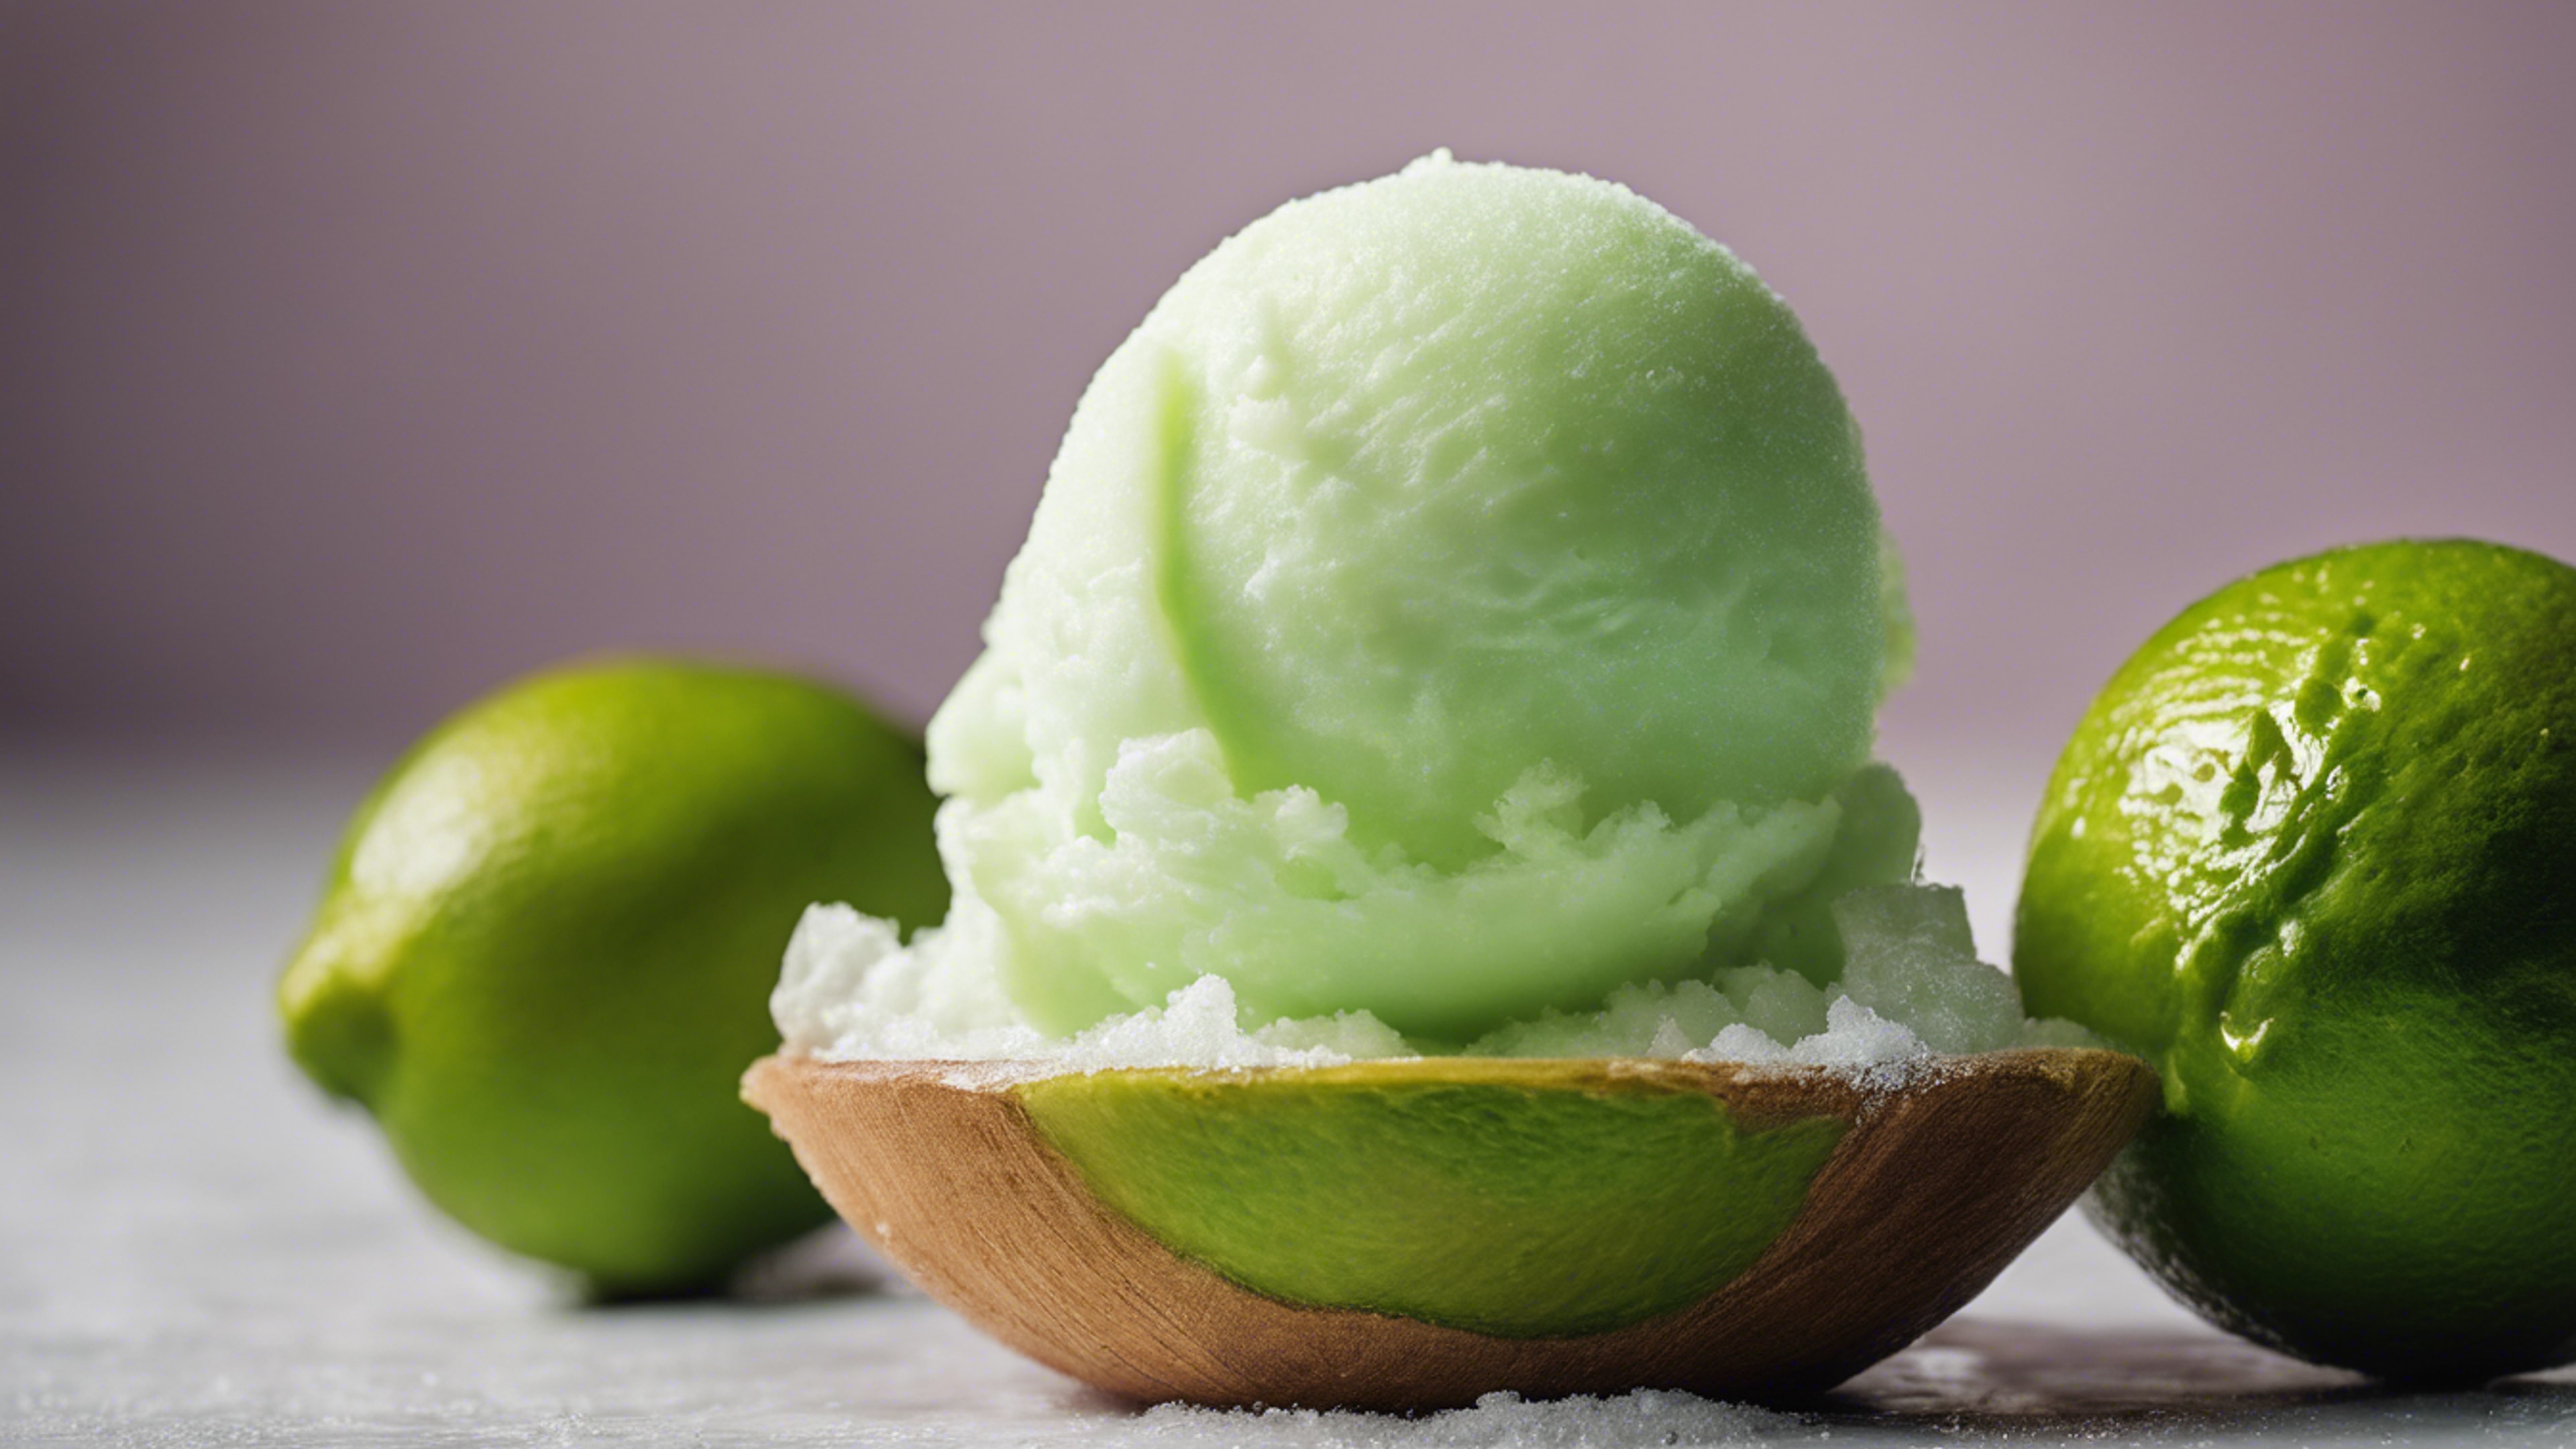 A refreshing lime sorbet in half a lime. טפט[a668216f0615484a943a]